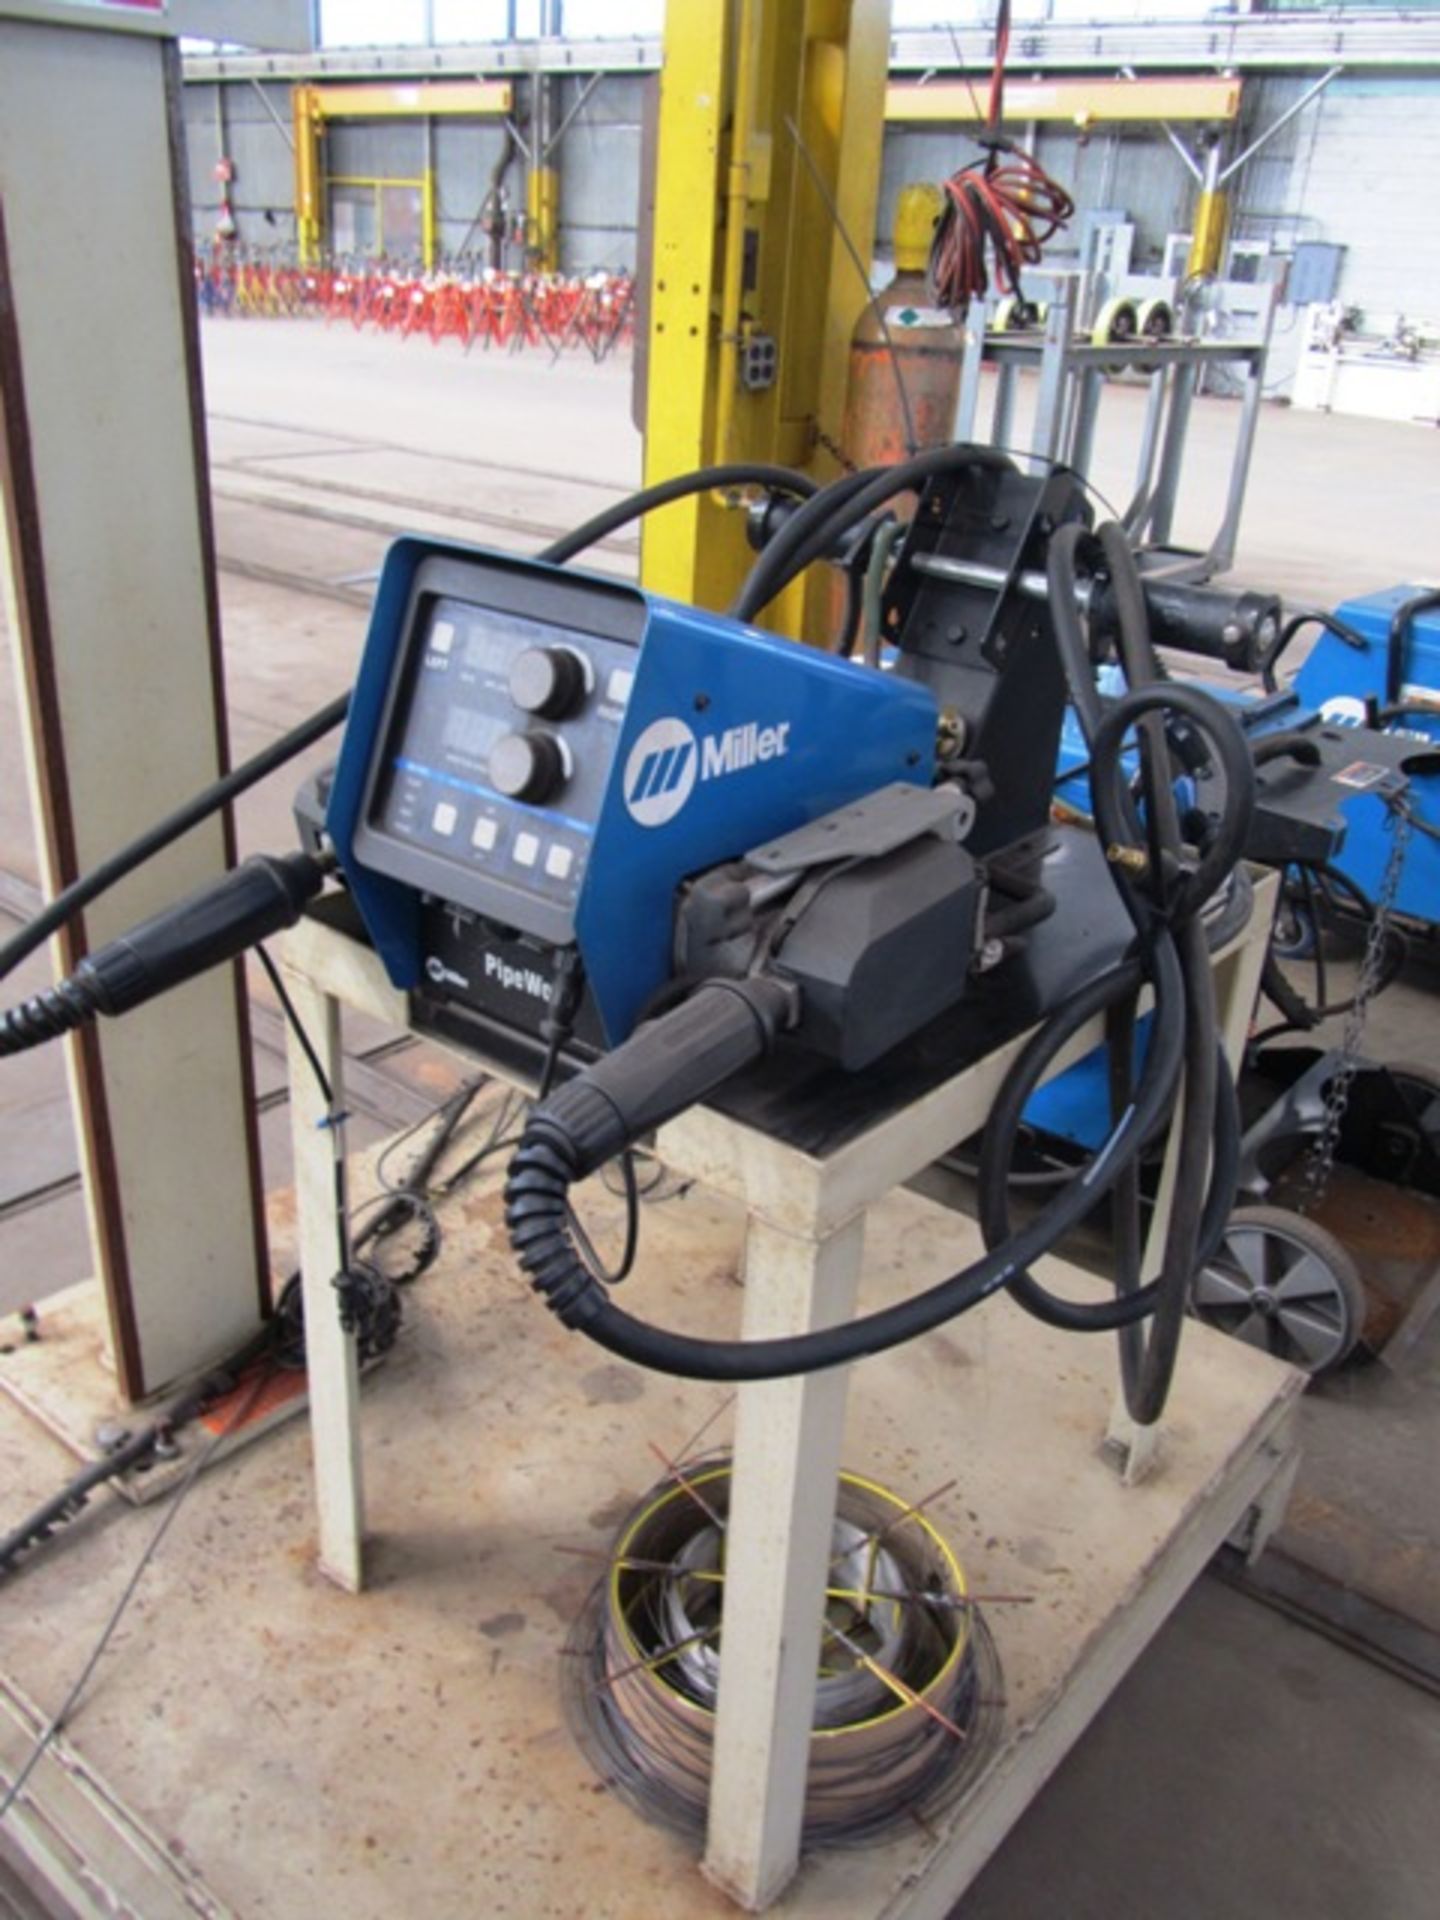 Miller PipeWorx 400 Portable Mig Welder with Miller PipeWorx Dual Wire Feeder, sn:MD130019G - Image 2 of 2